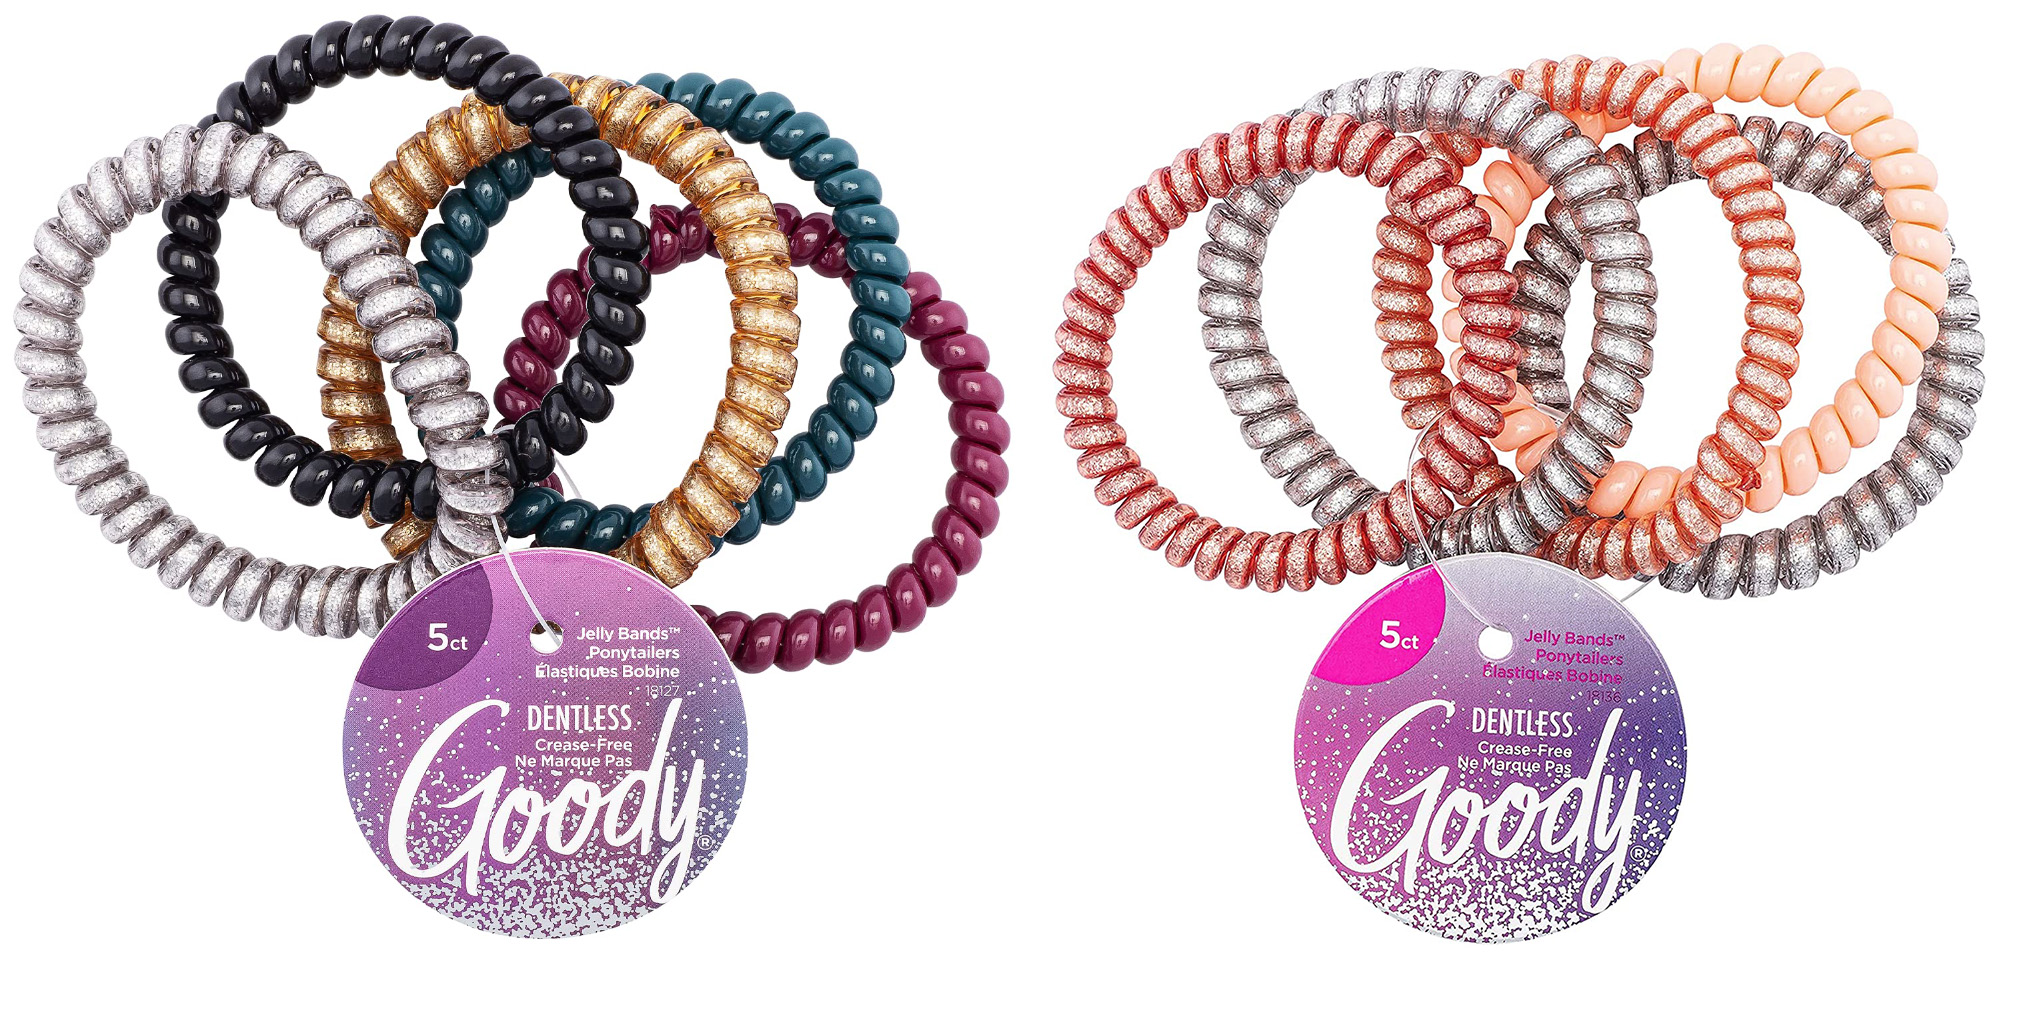 Goody Icy Holiday Skinny Coils 5ct - Click Image to Close